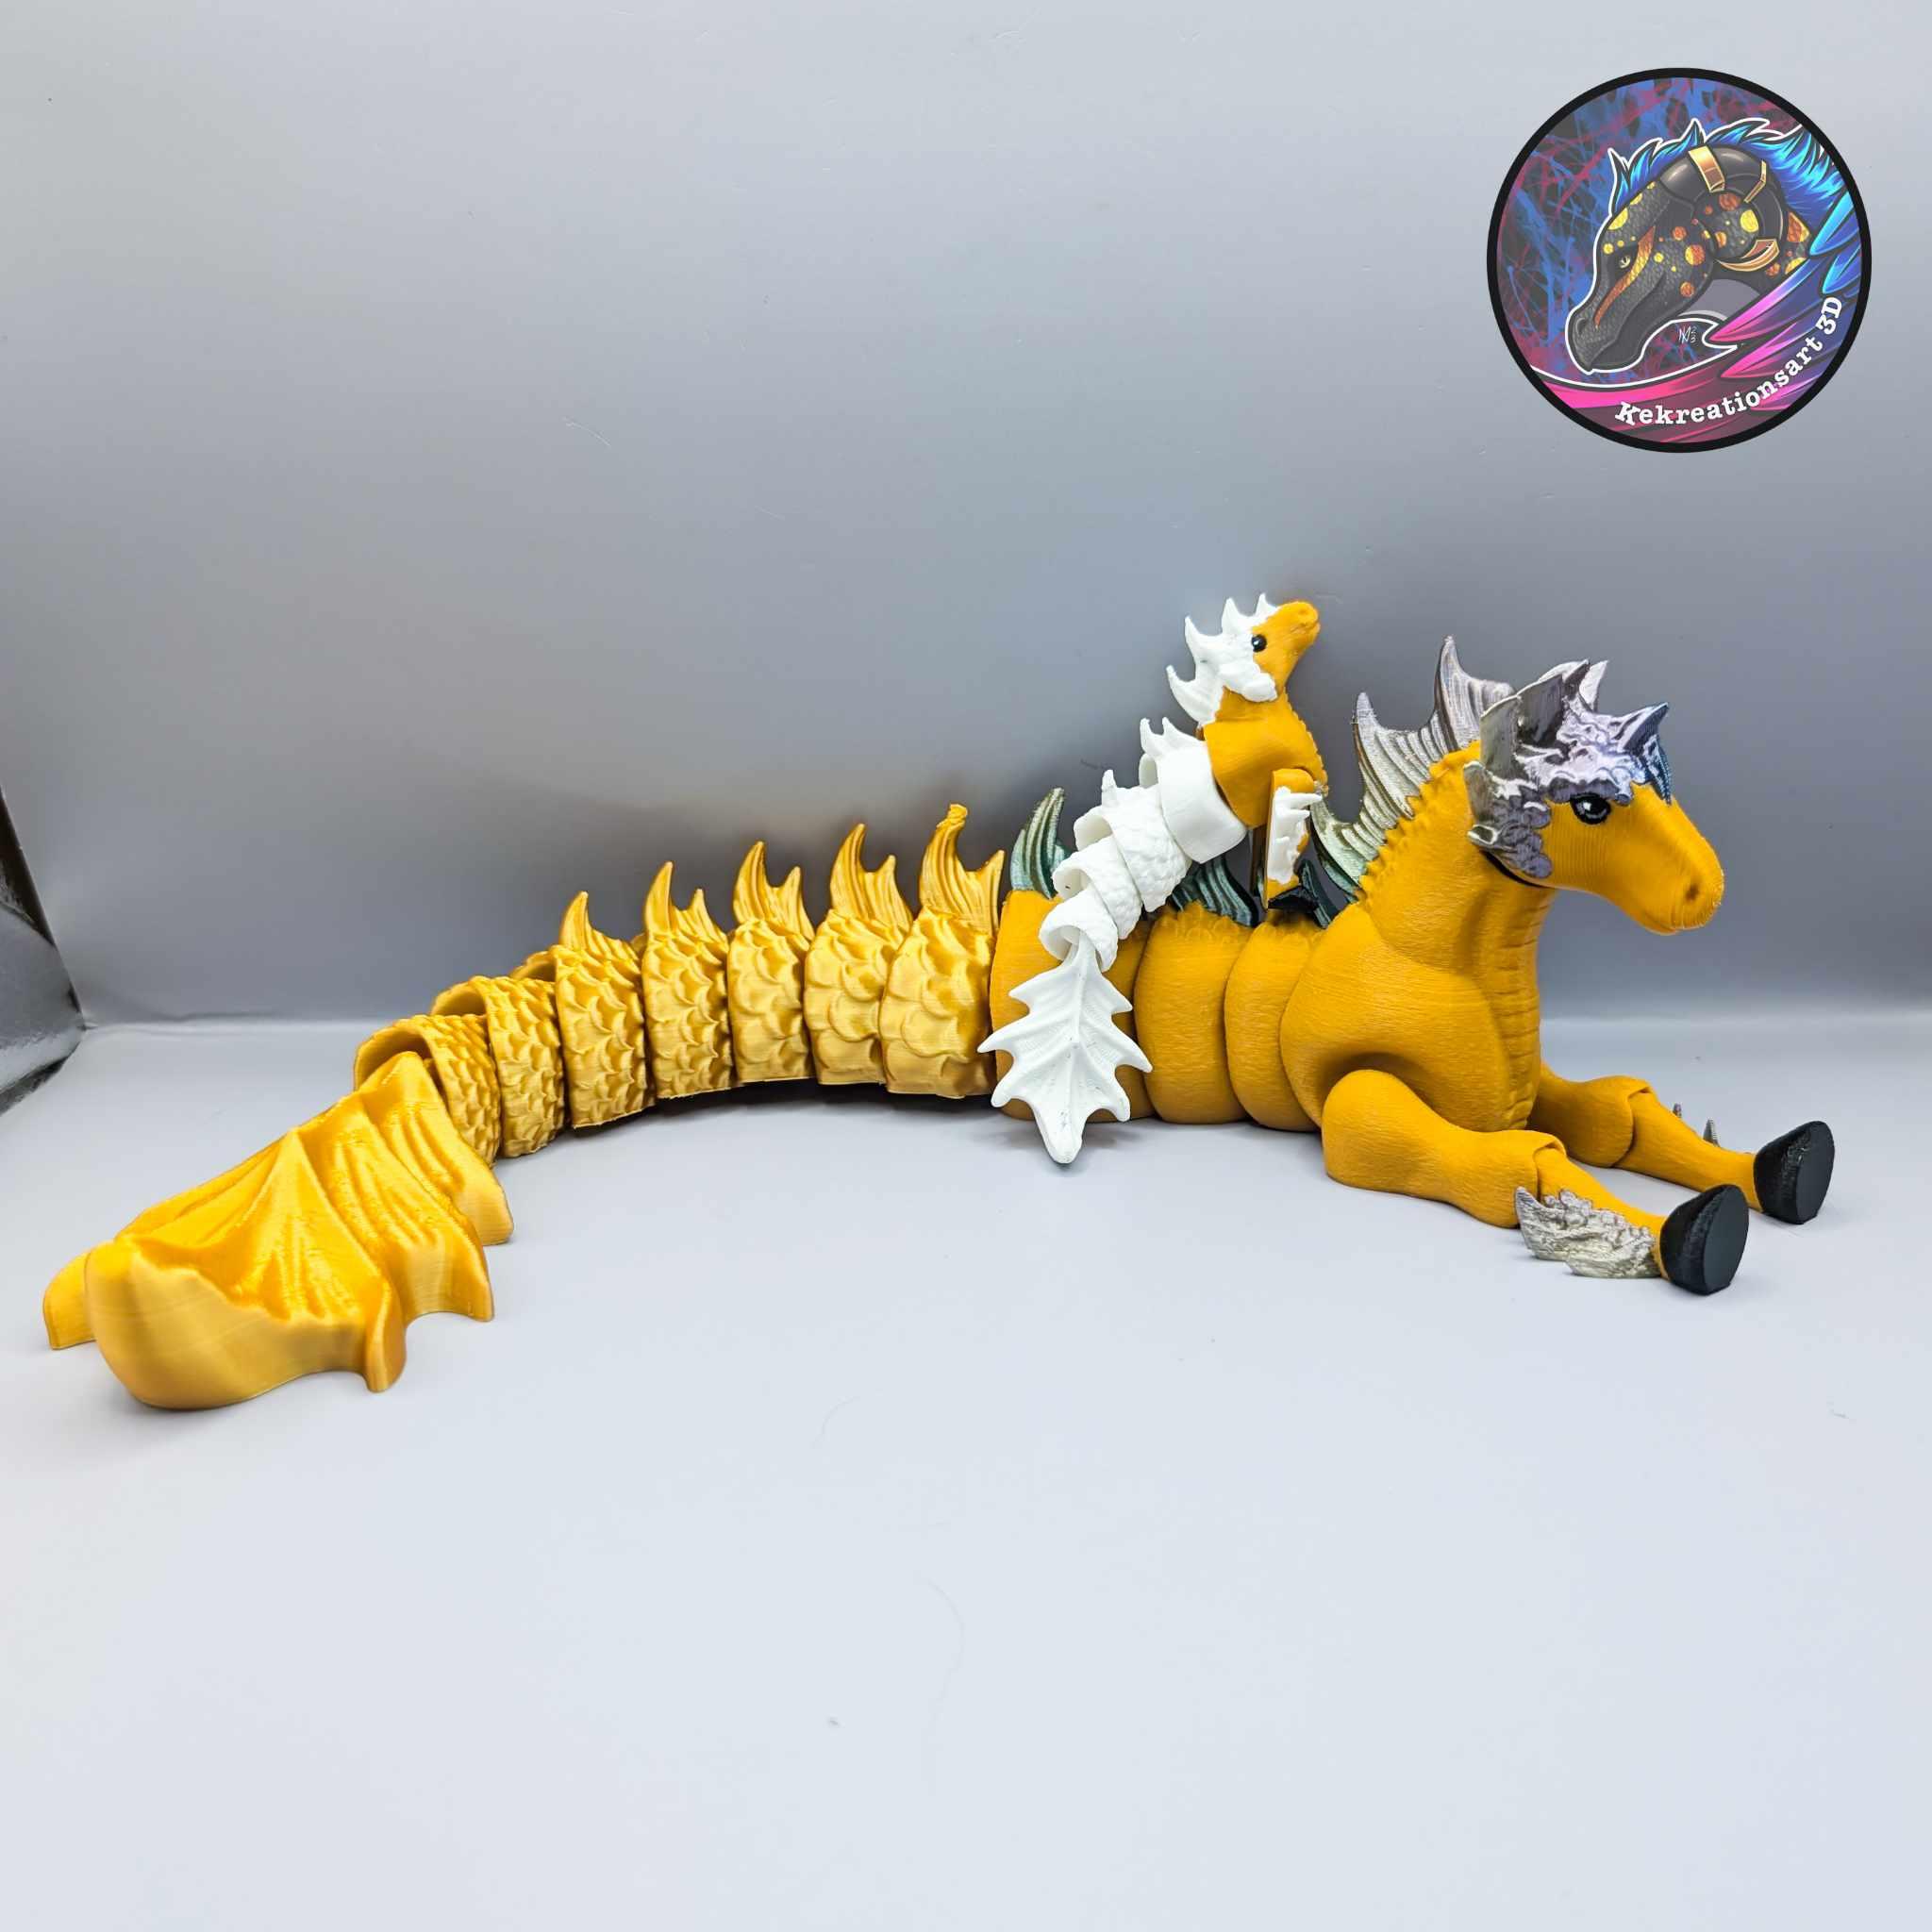 FLEXI Hippocampus Sea Horse Adult + Baby EARLY ACCESS